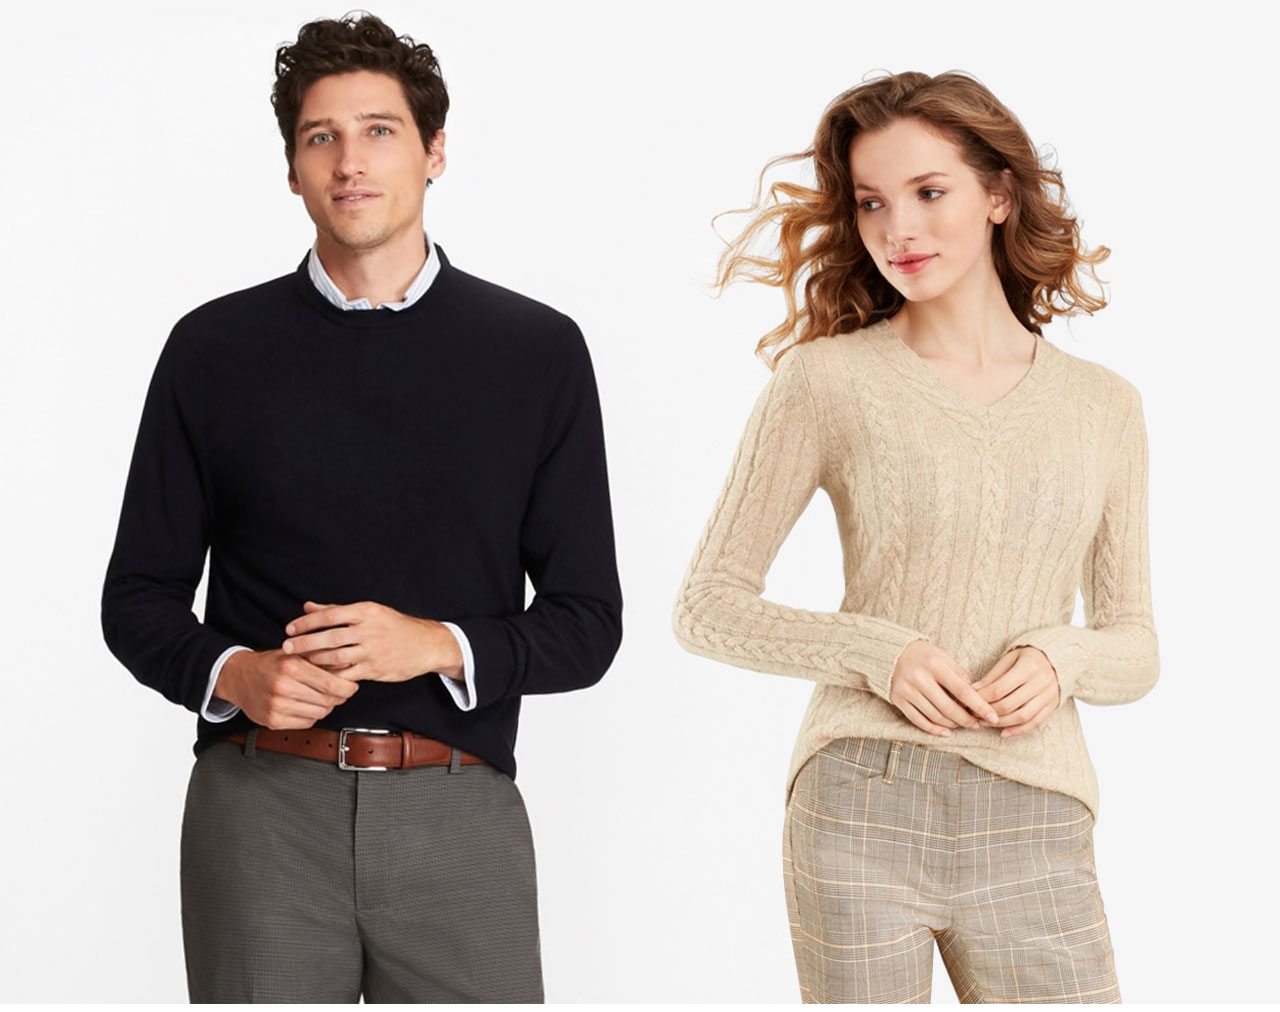 Keep It Neutral - Our lightweight merino sweaters have the perfect feel for fall. Available in neutral shades, they can be easily worn alone or over your favorite shirt.